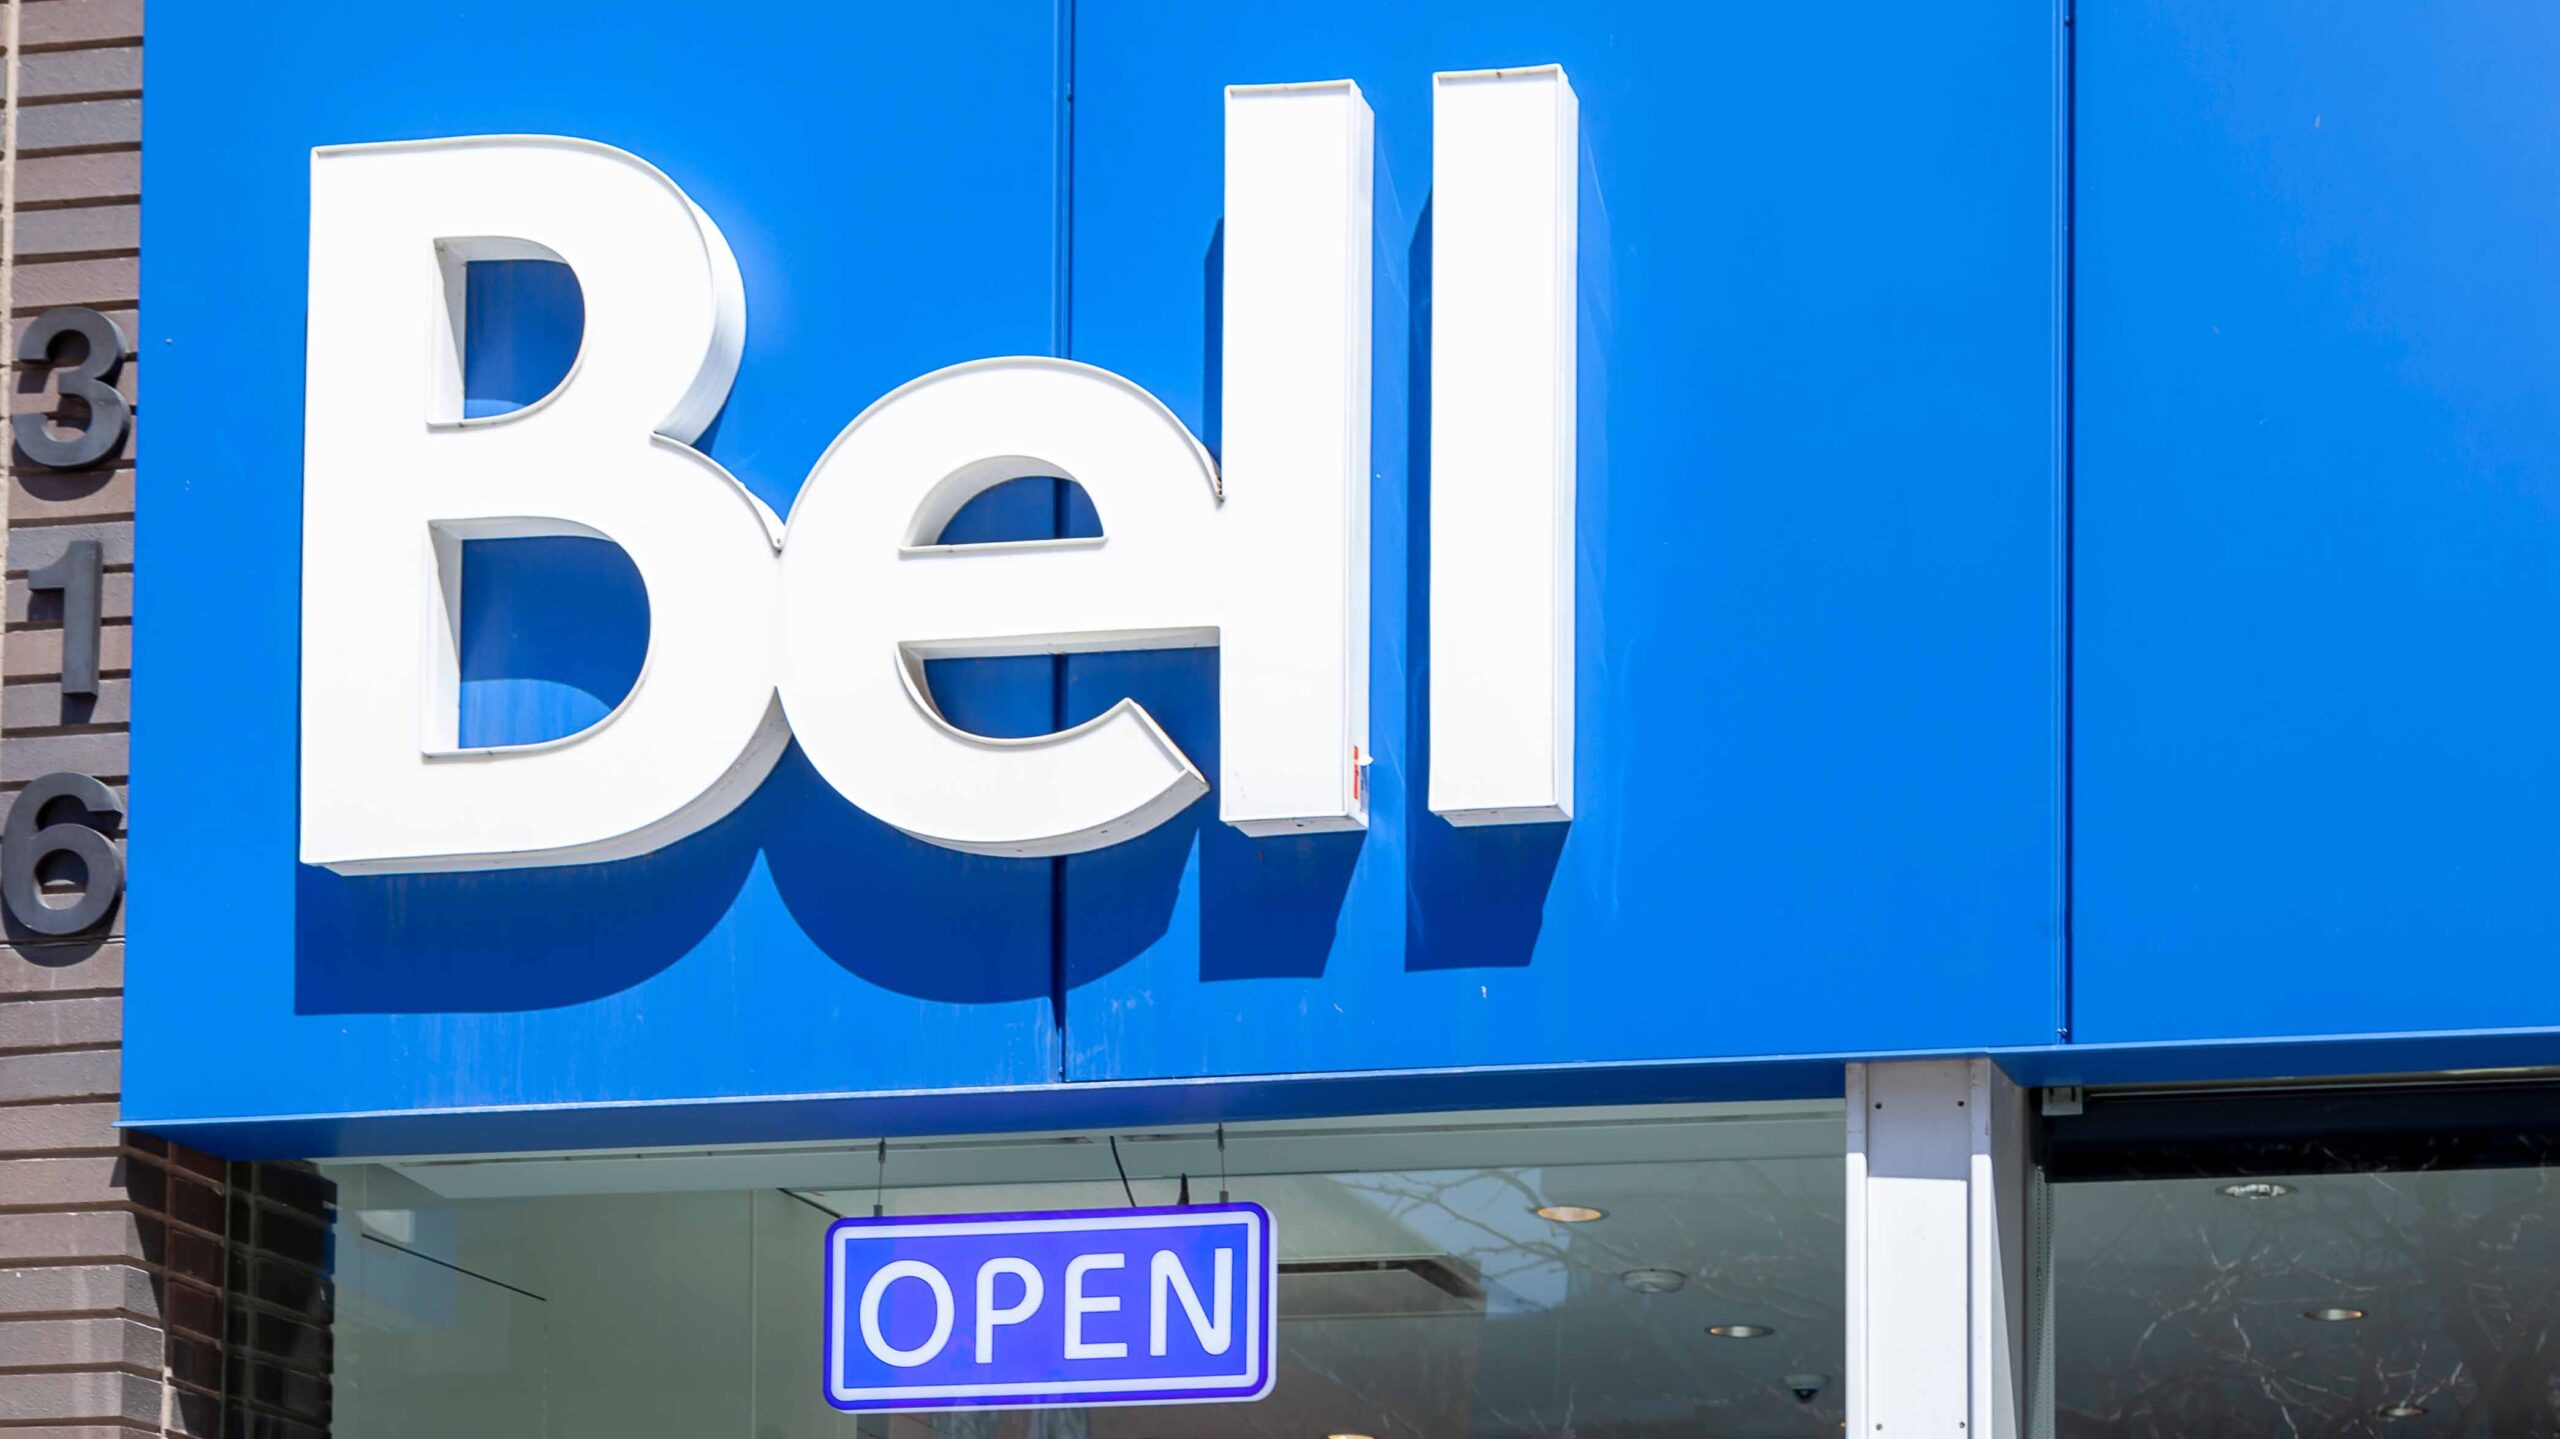 Bell cutting ‘a minimum of 0 to 0 million’ in planned network investments following CRTC decision